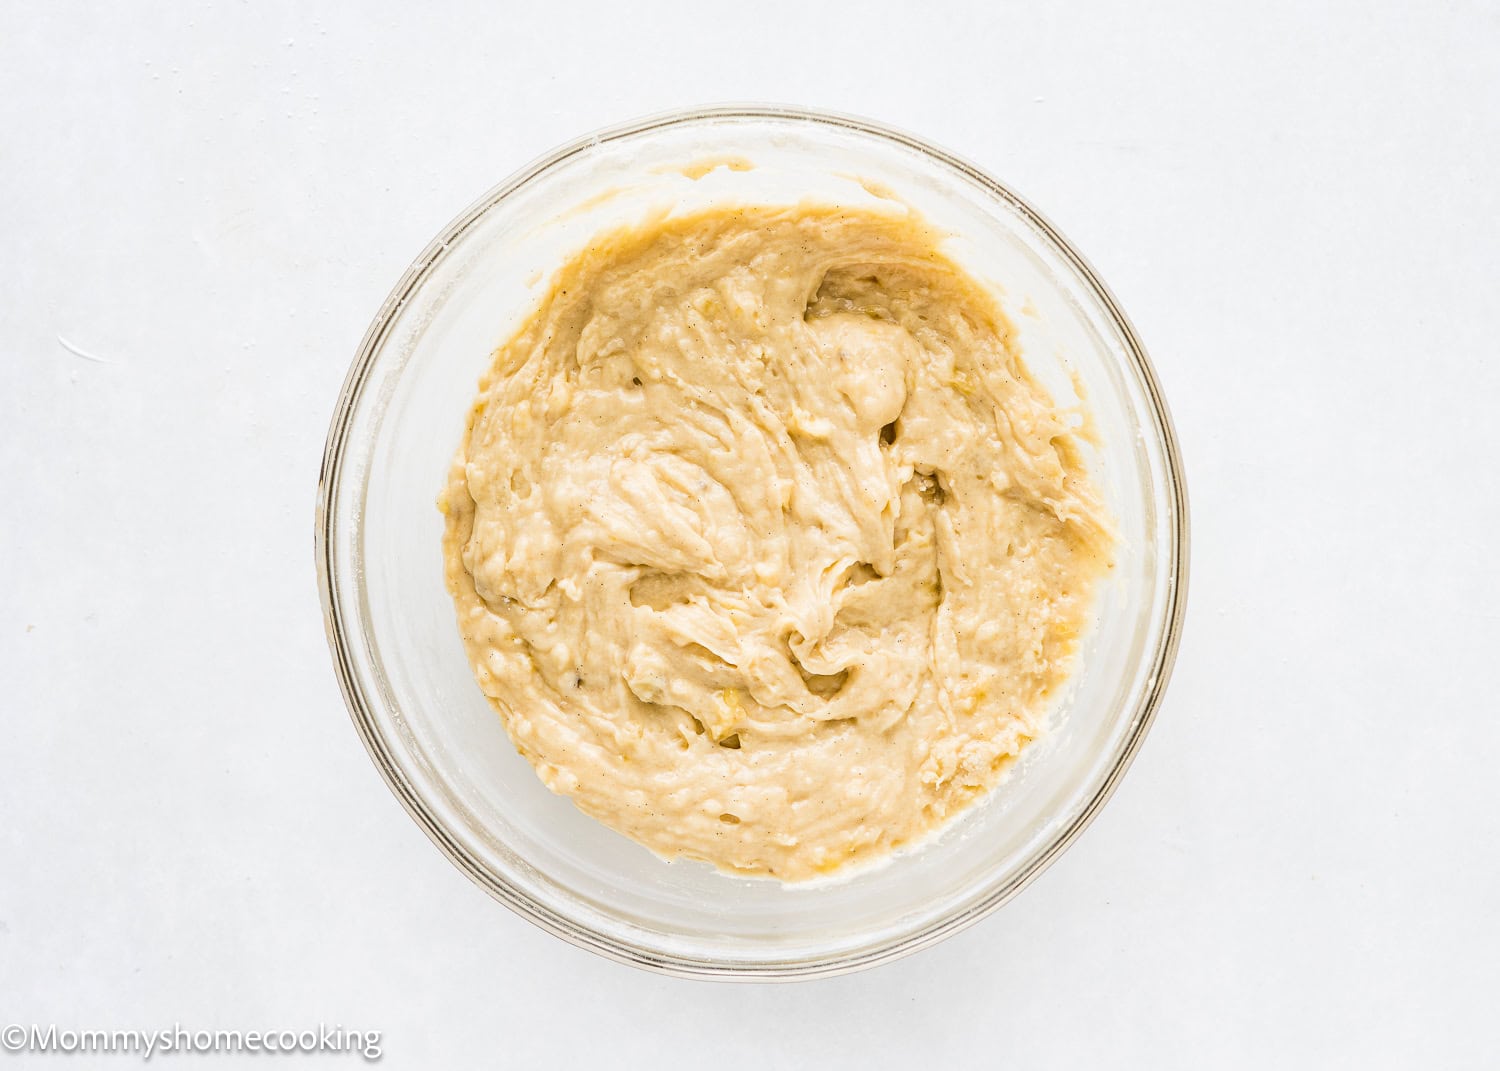 Healthy Easy Banana Muffins batter made with no eggs, dairy or sugar in a bowl.